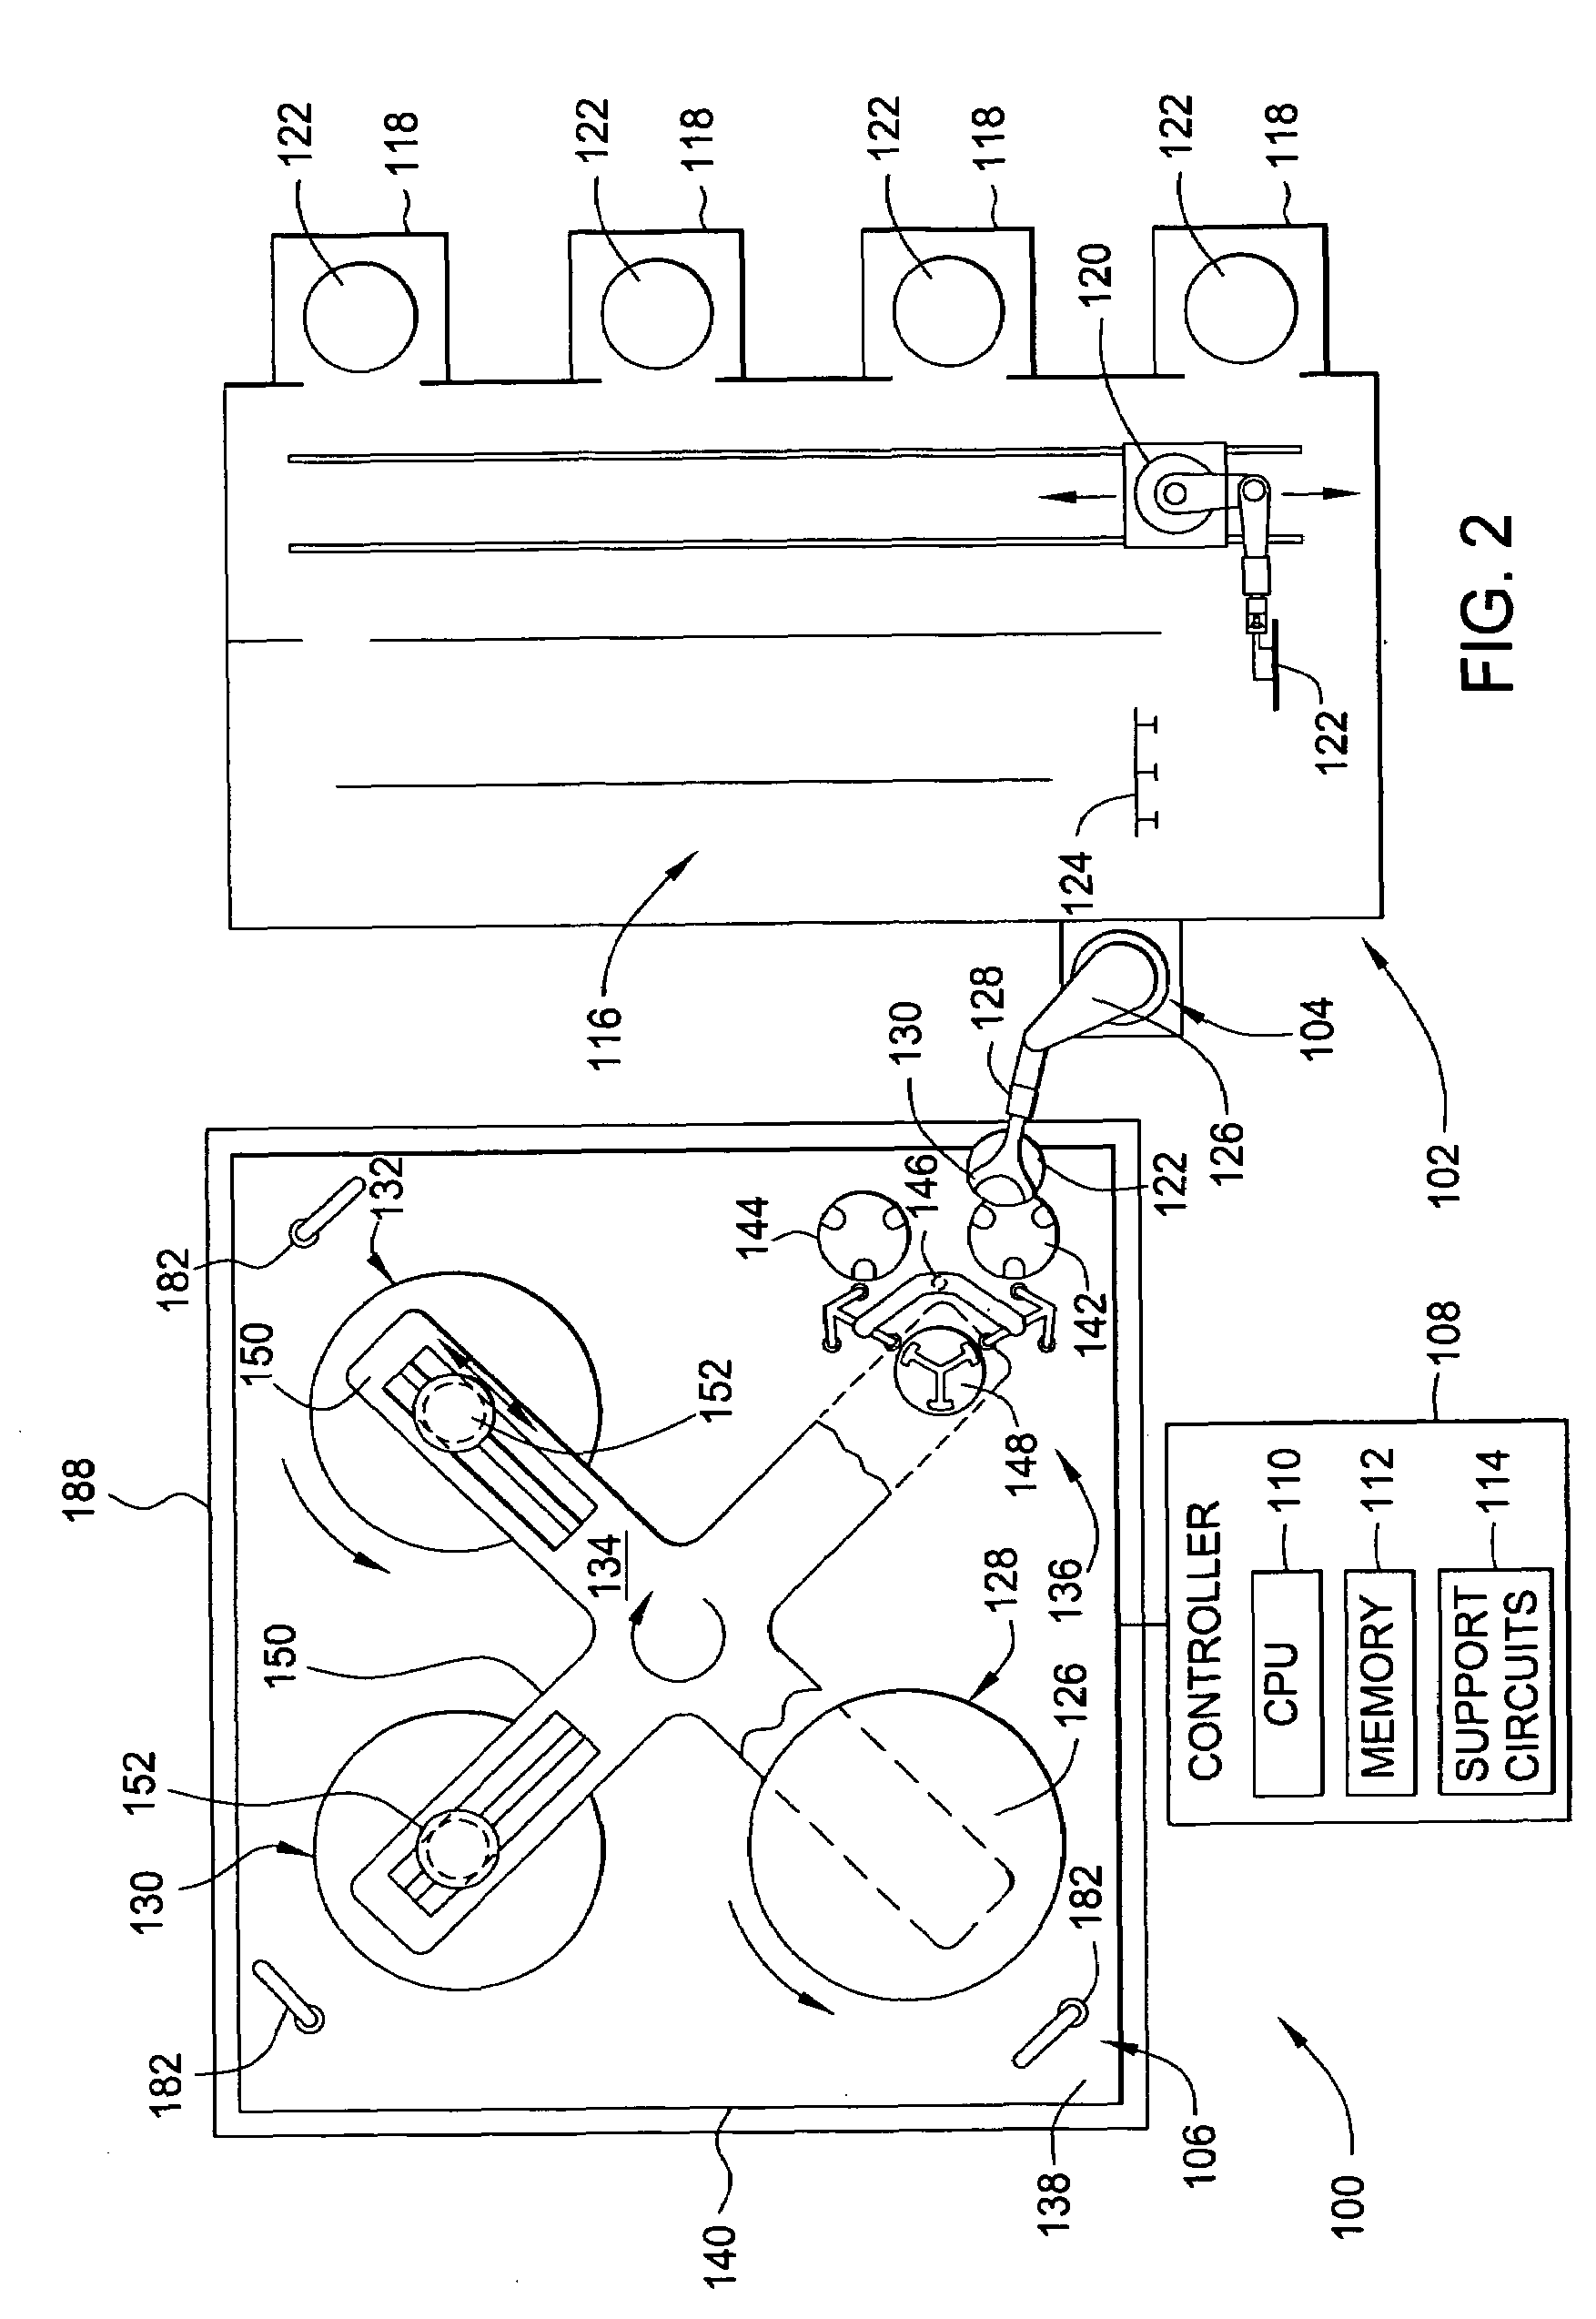 Process and composition for conductive material removal by electrochemical mechanical polishing